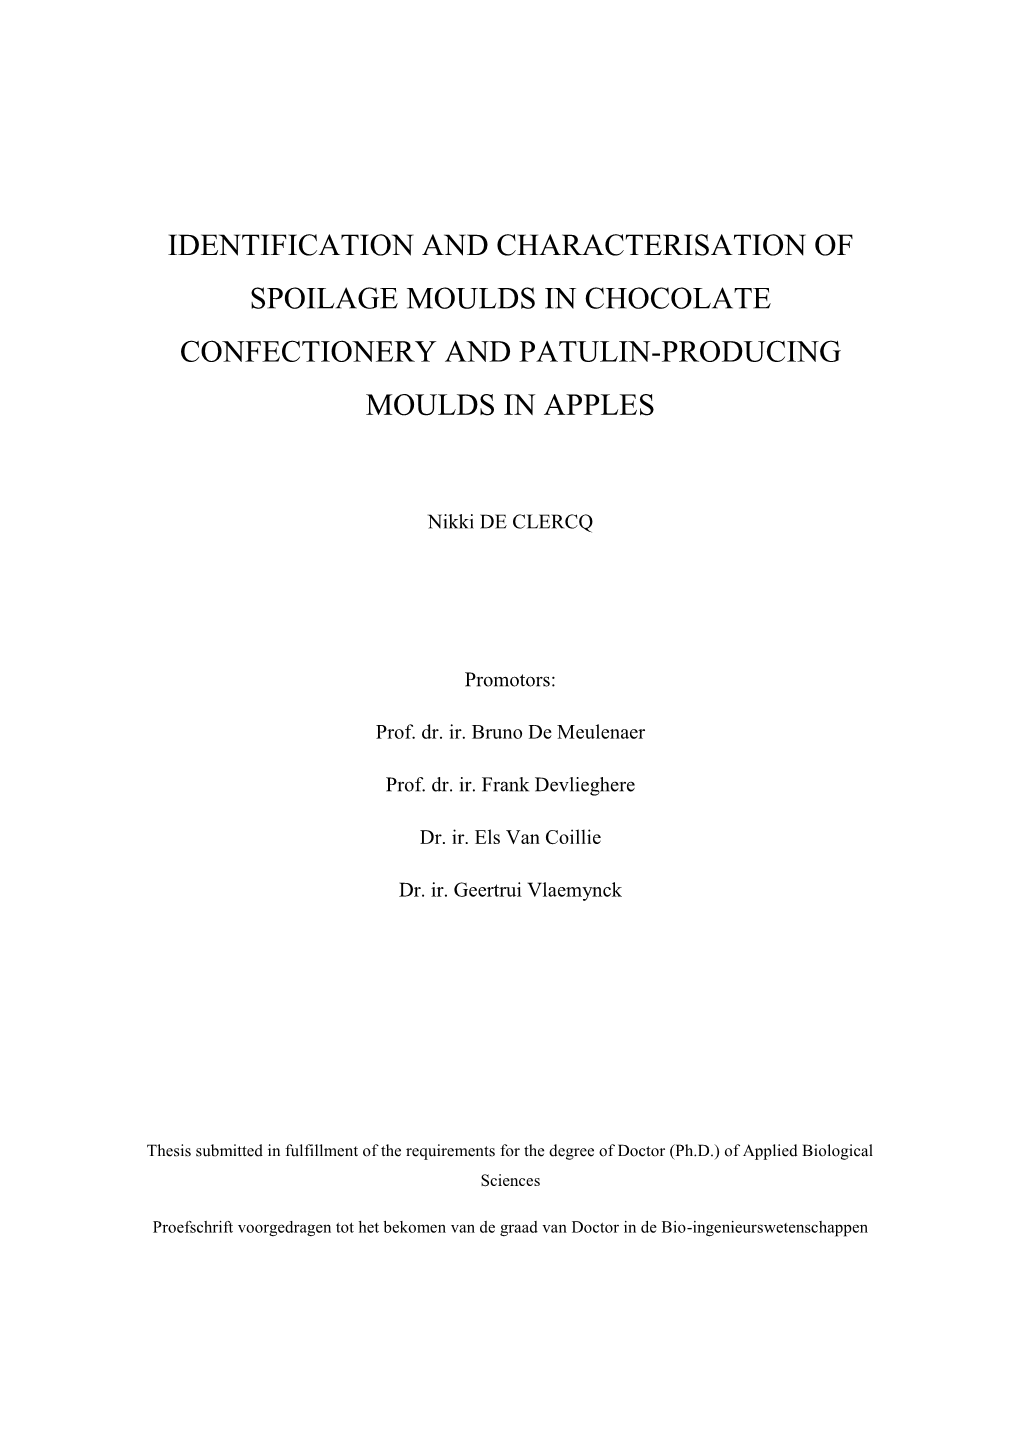 Identification and Characterisation of Spoilage Moulds in Chocolate Confectionery and Patulin-Producing Moulds in Apples